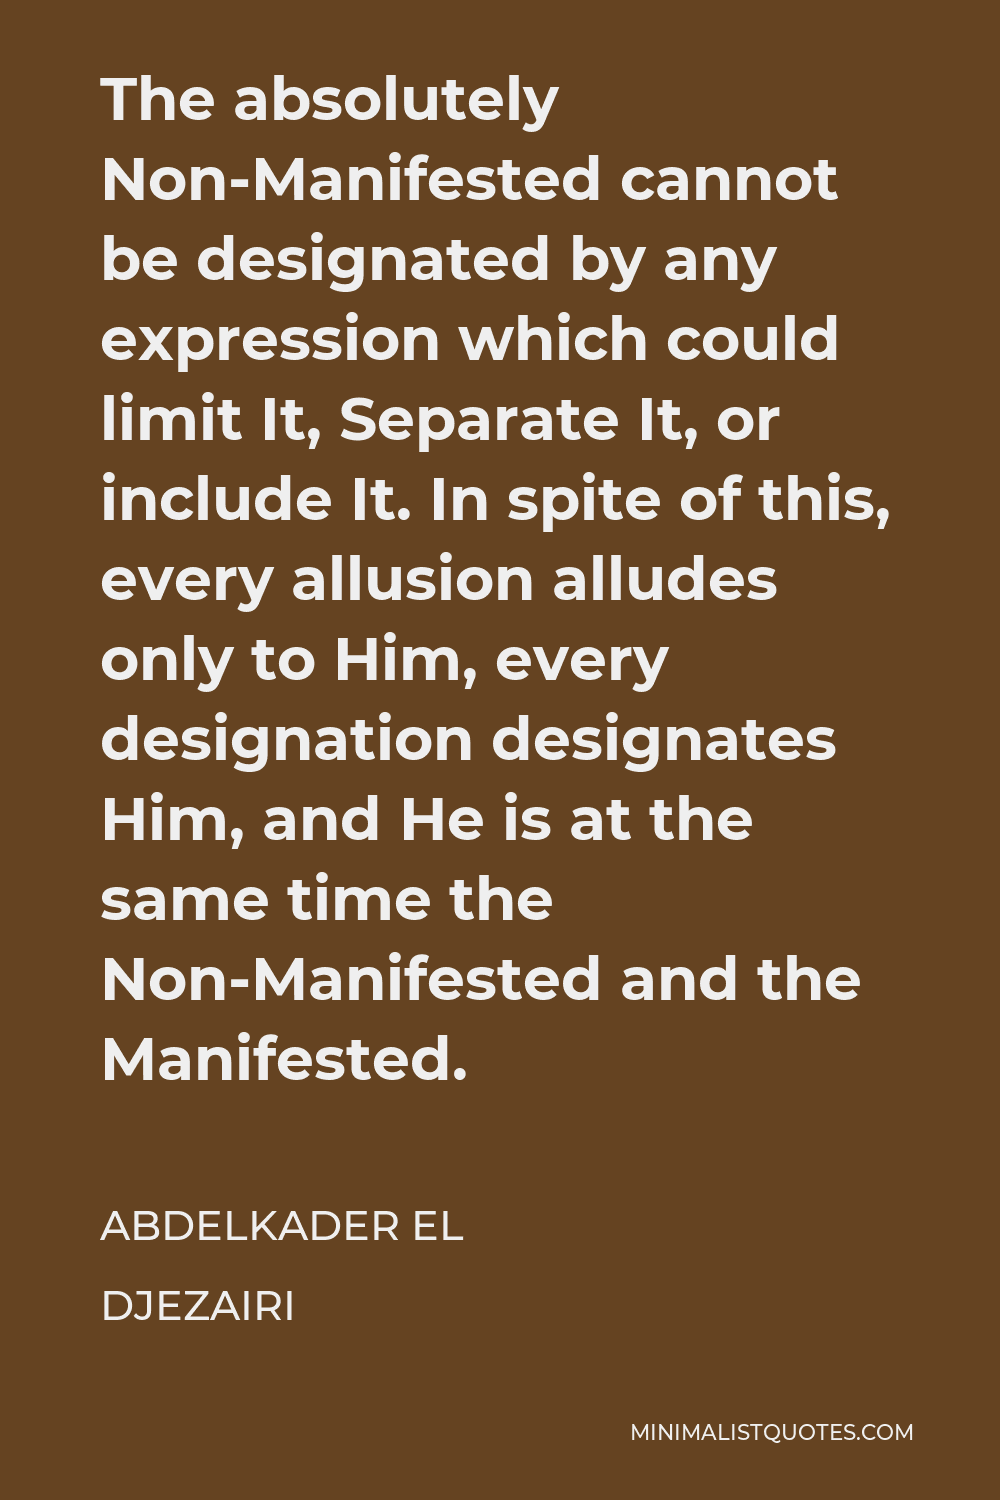 Abdelkader El Djezairi Quote - The absolutely Non-Manifested cannot be designated by any expression which could limit It, Separate It, or include It. In spite of this, every allusion alludes only to Him, every designation designates Him, and He is at the same time the Non-Manifested and the Manifested.